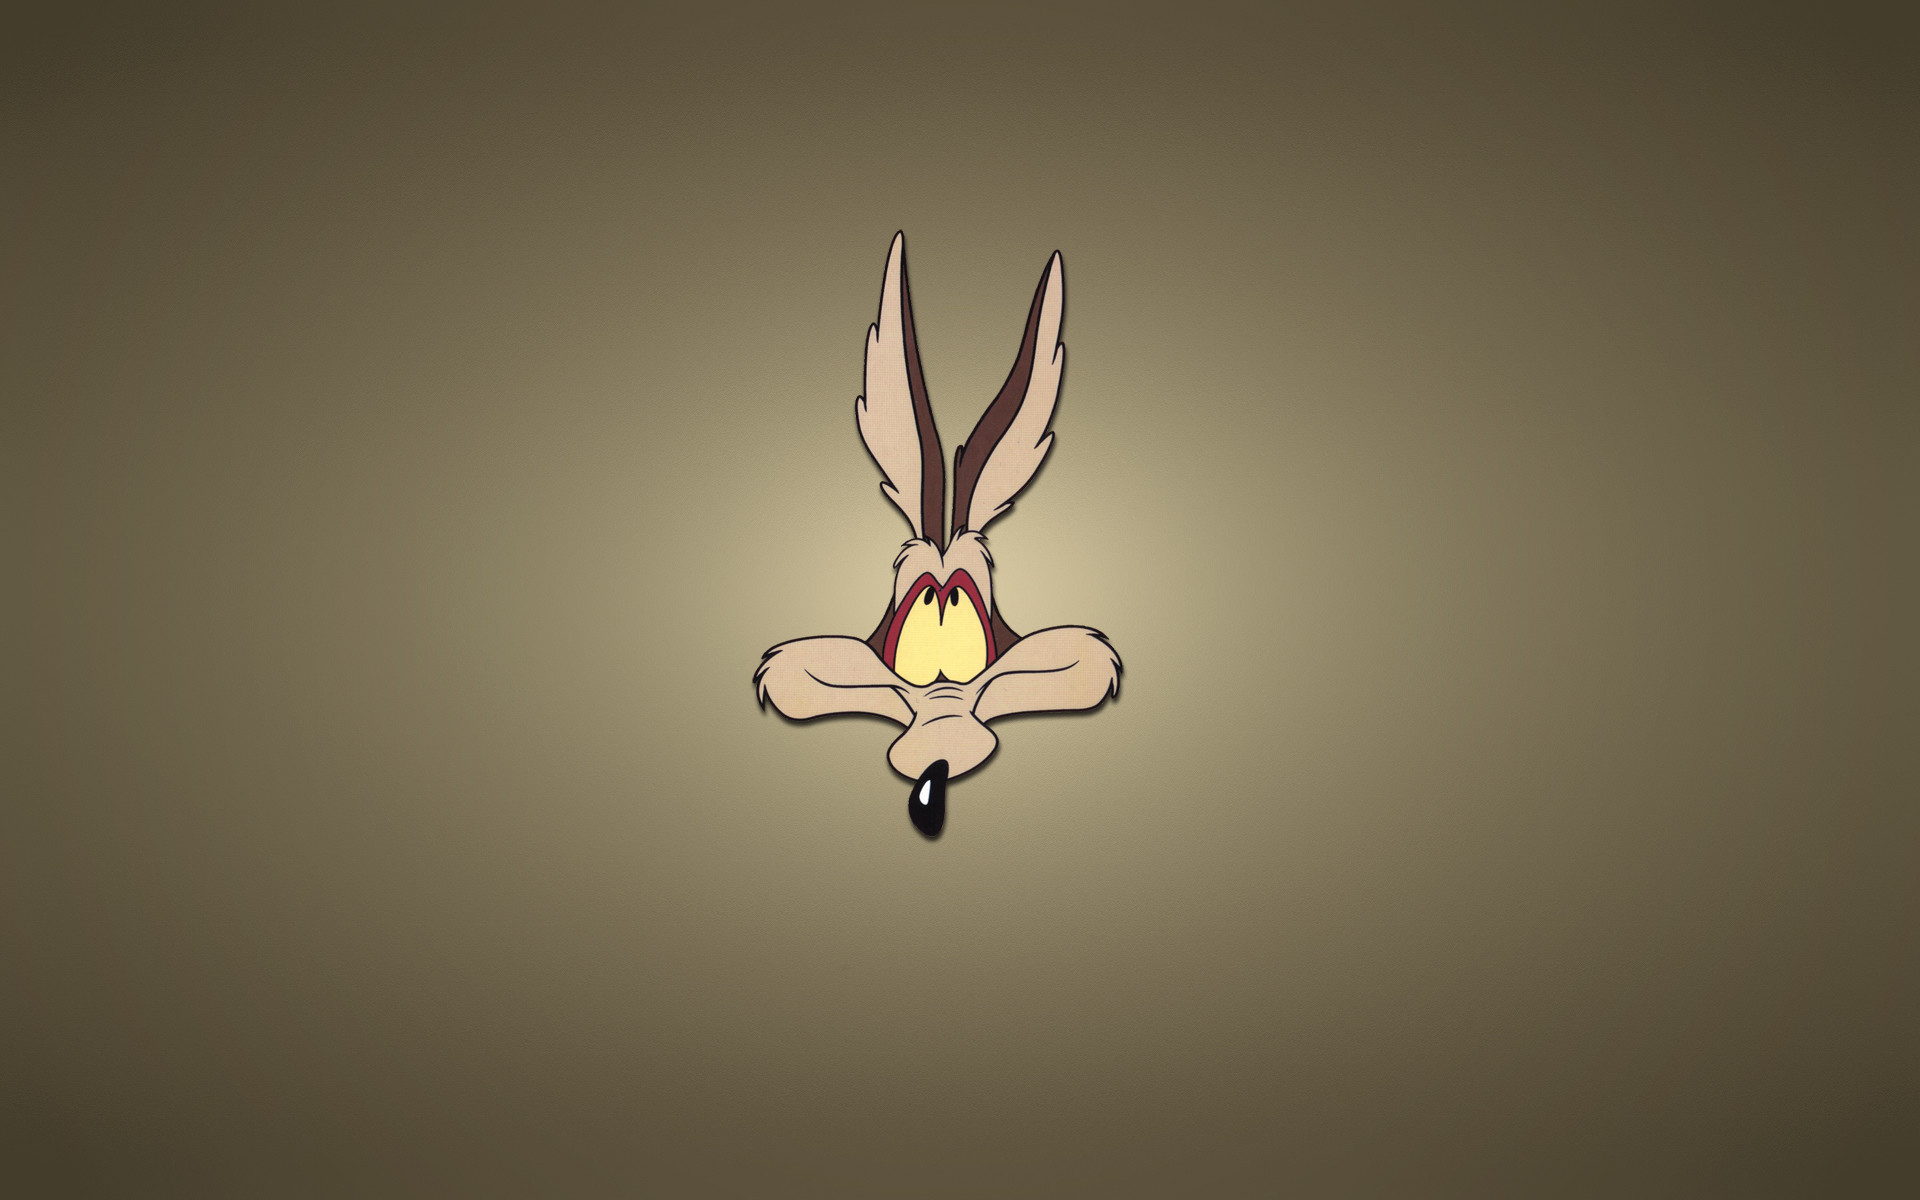 1920x1200 Looney tunes, merry melodies, looney tunes, wile e. coyote, head,